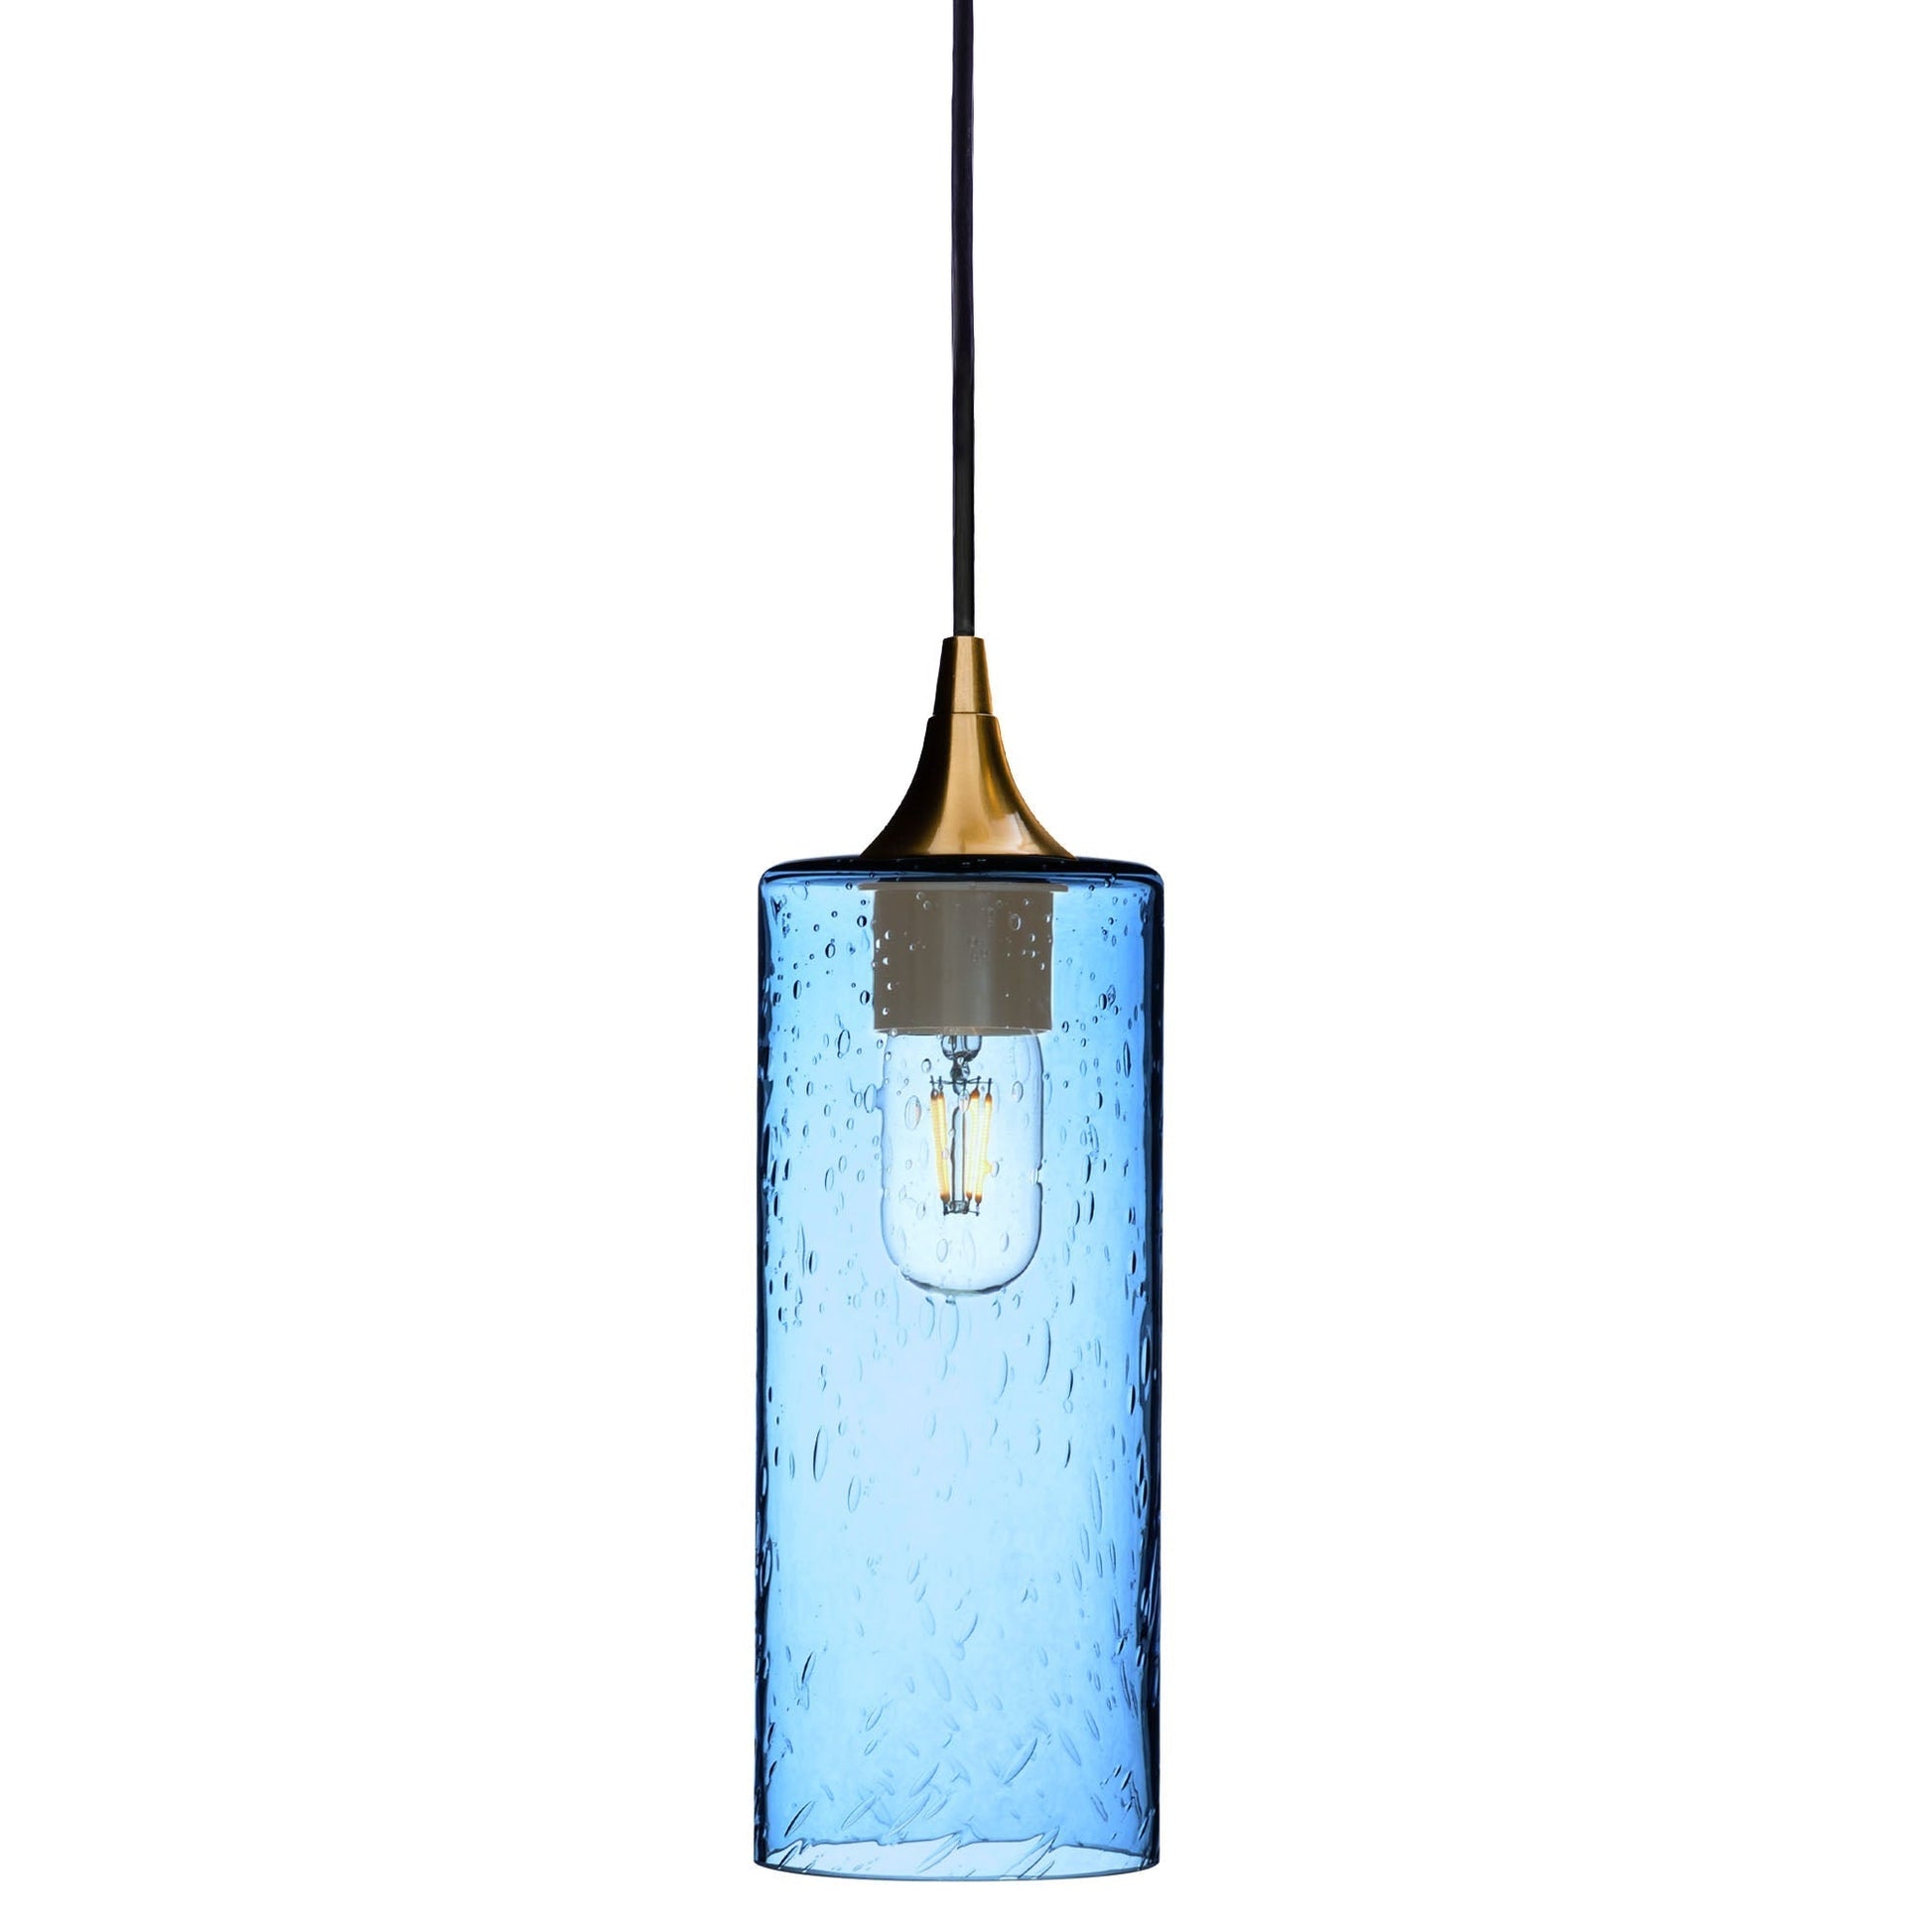 515 Lunar: Single Pendant Light-Glass-Bicycle Glass Co - Hotshop-Steel Blue-Polished Brass-Bicycle Glass Co